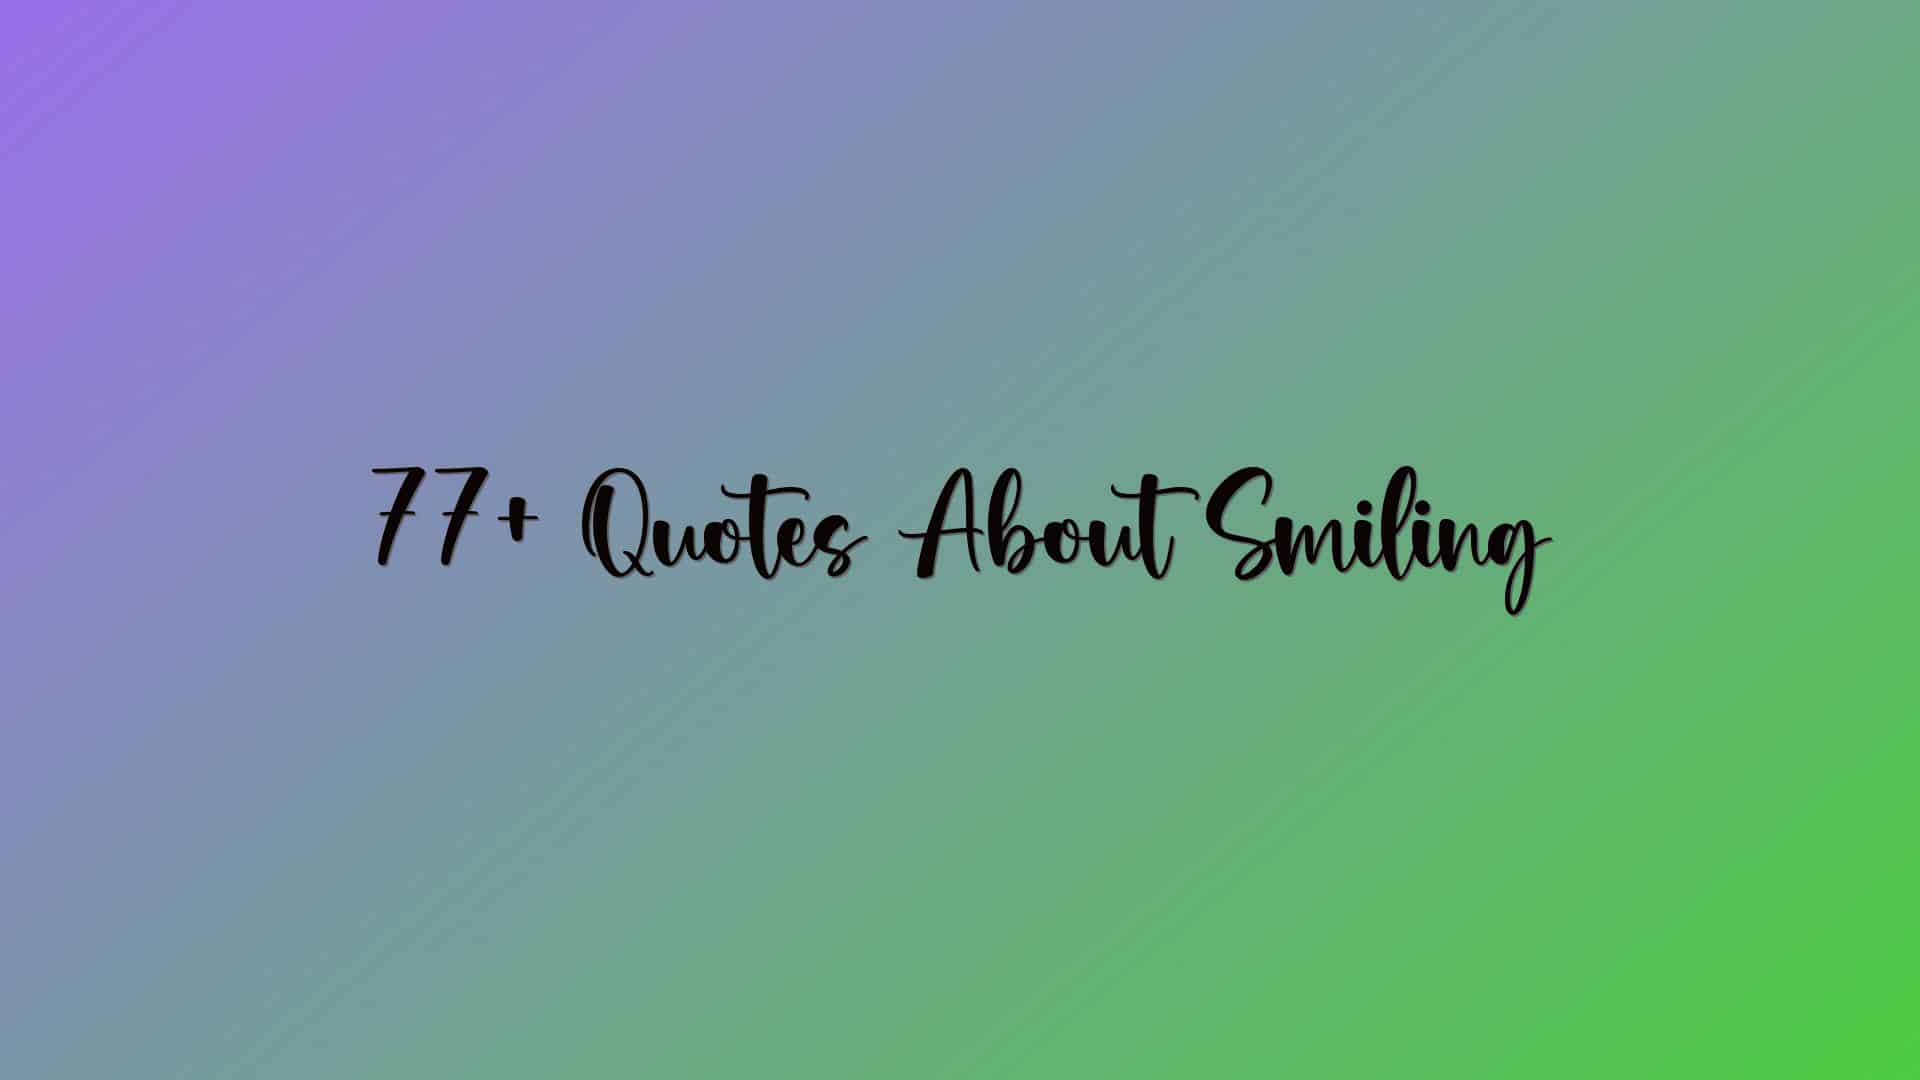 77+ Quotes About Smiling